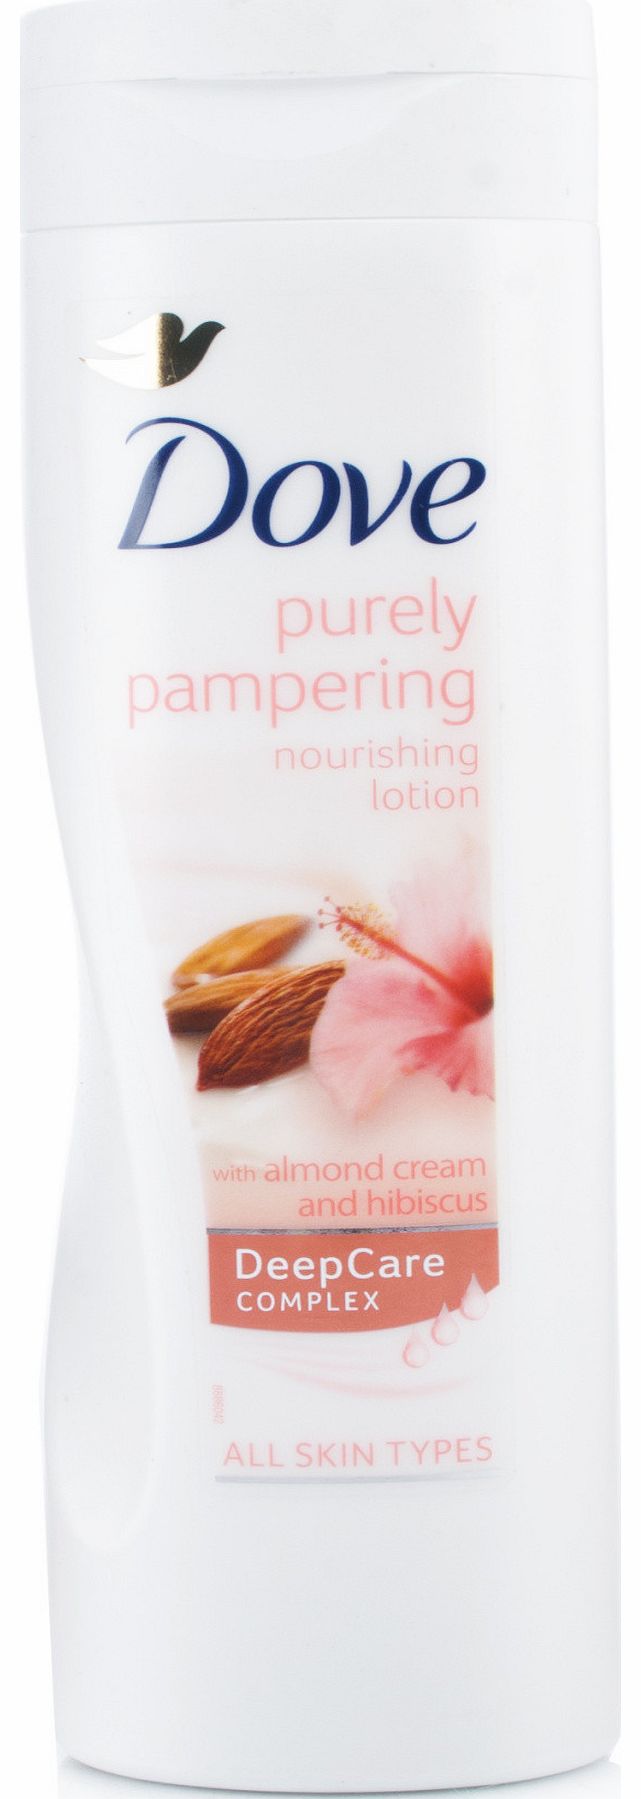 Dove Purely Pampering Almond Lotion 250ml